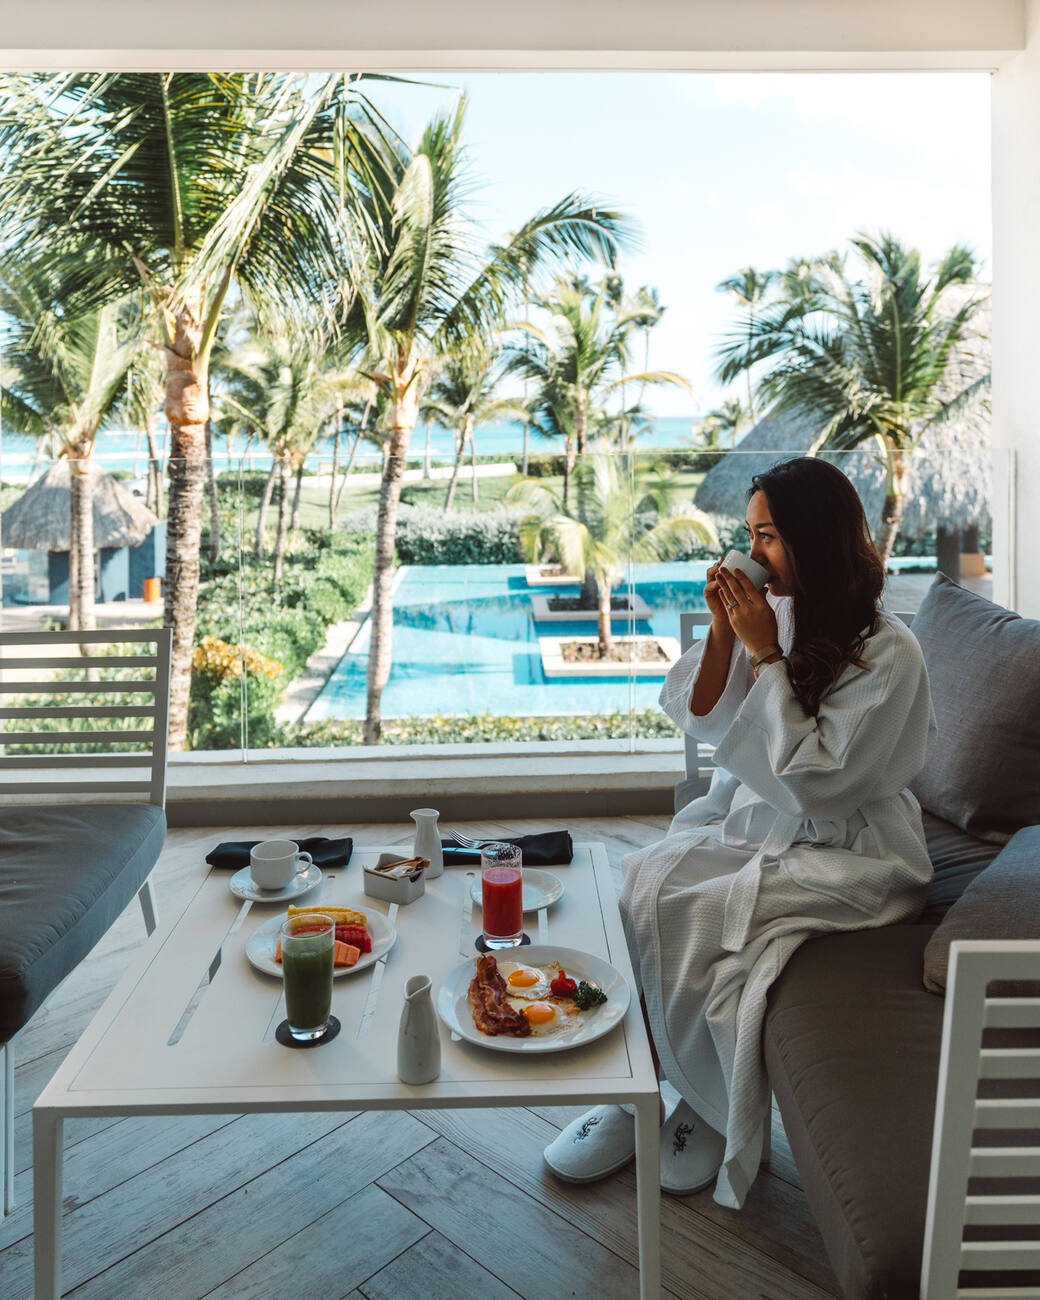 Woman in a bathrobe drinking coffee with breakfast on the table overlooking the ocean